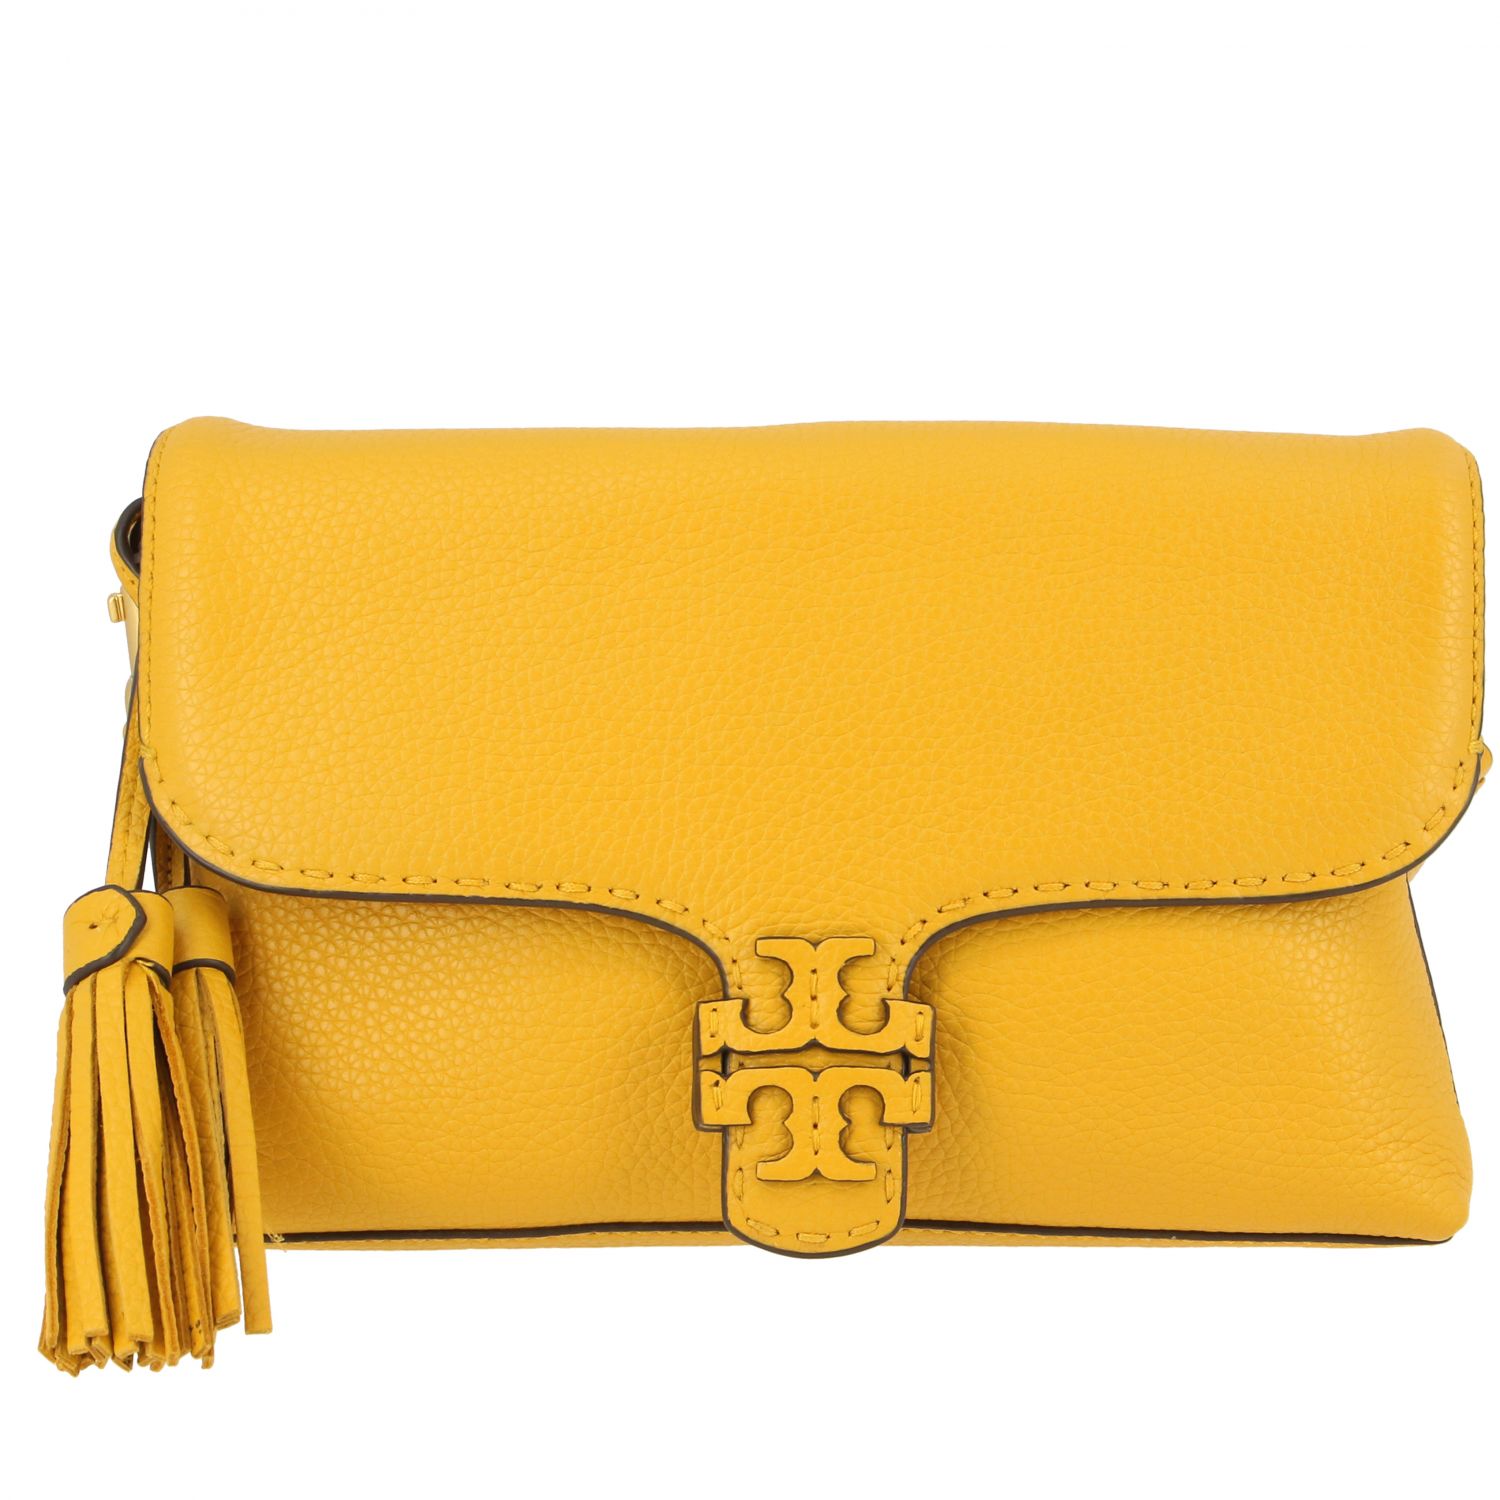 TORY BURCH: Mcgraw fold-over shoulder bag in grained leather - Ocher | Tory  Burch crossbody bags 53163 online on 